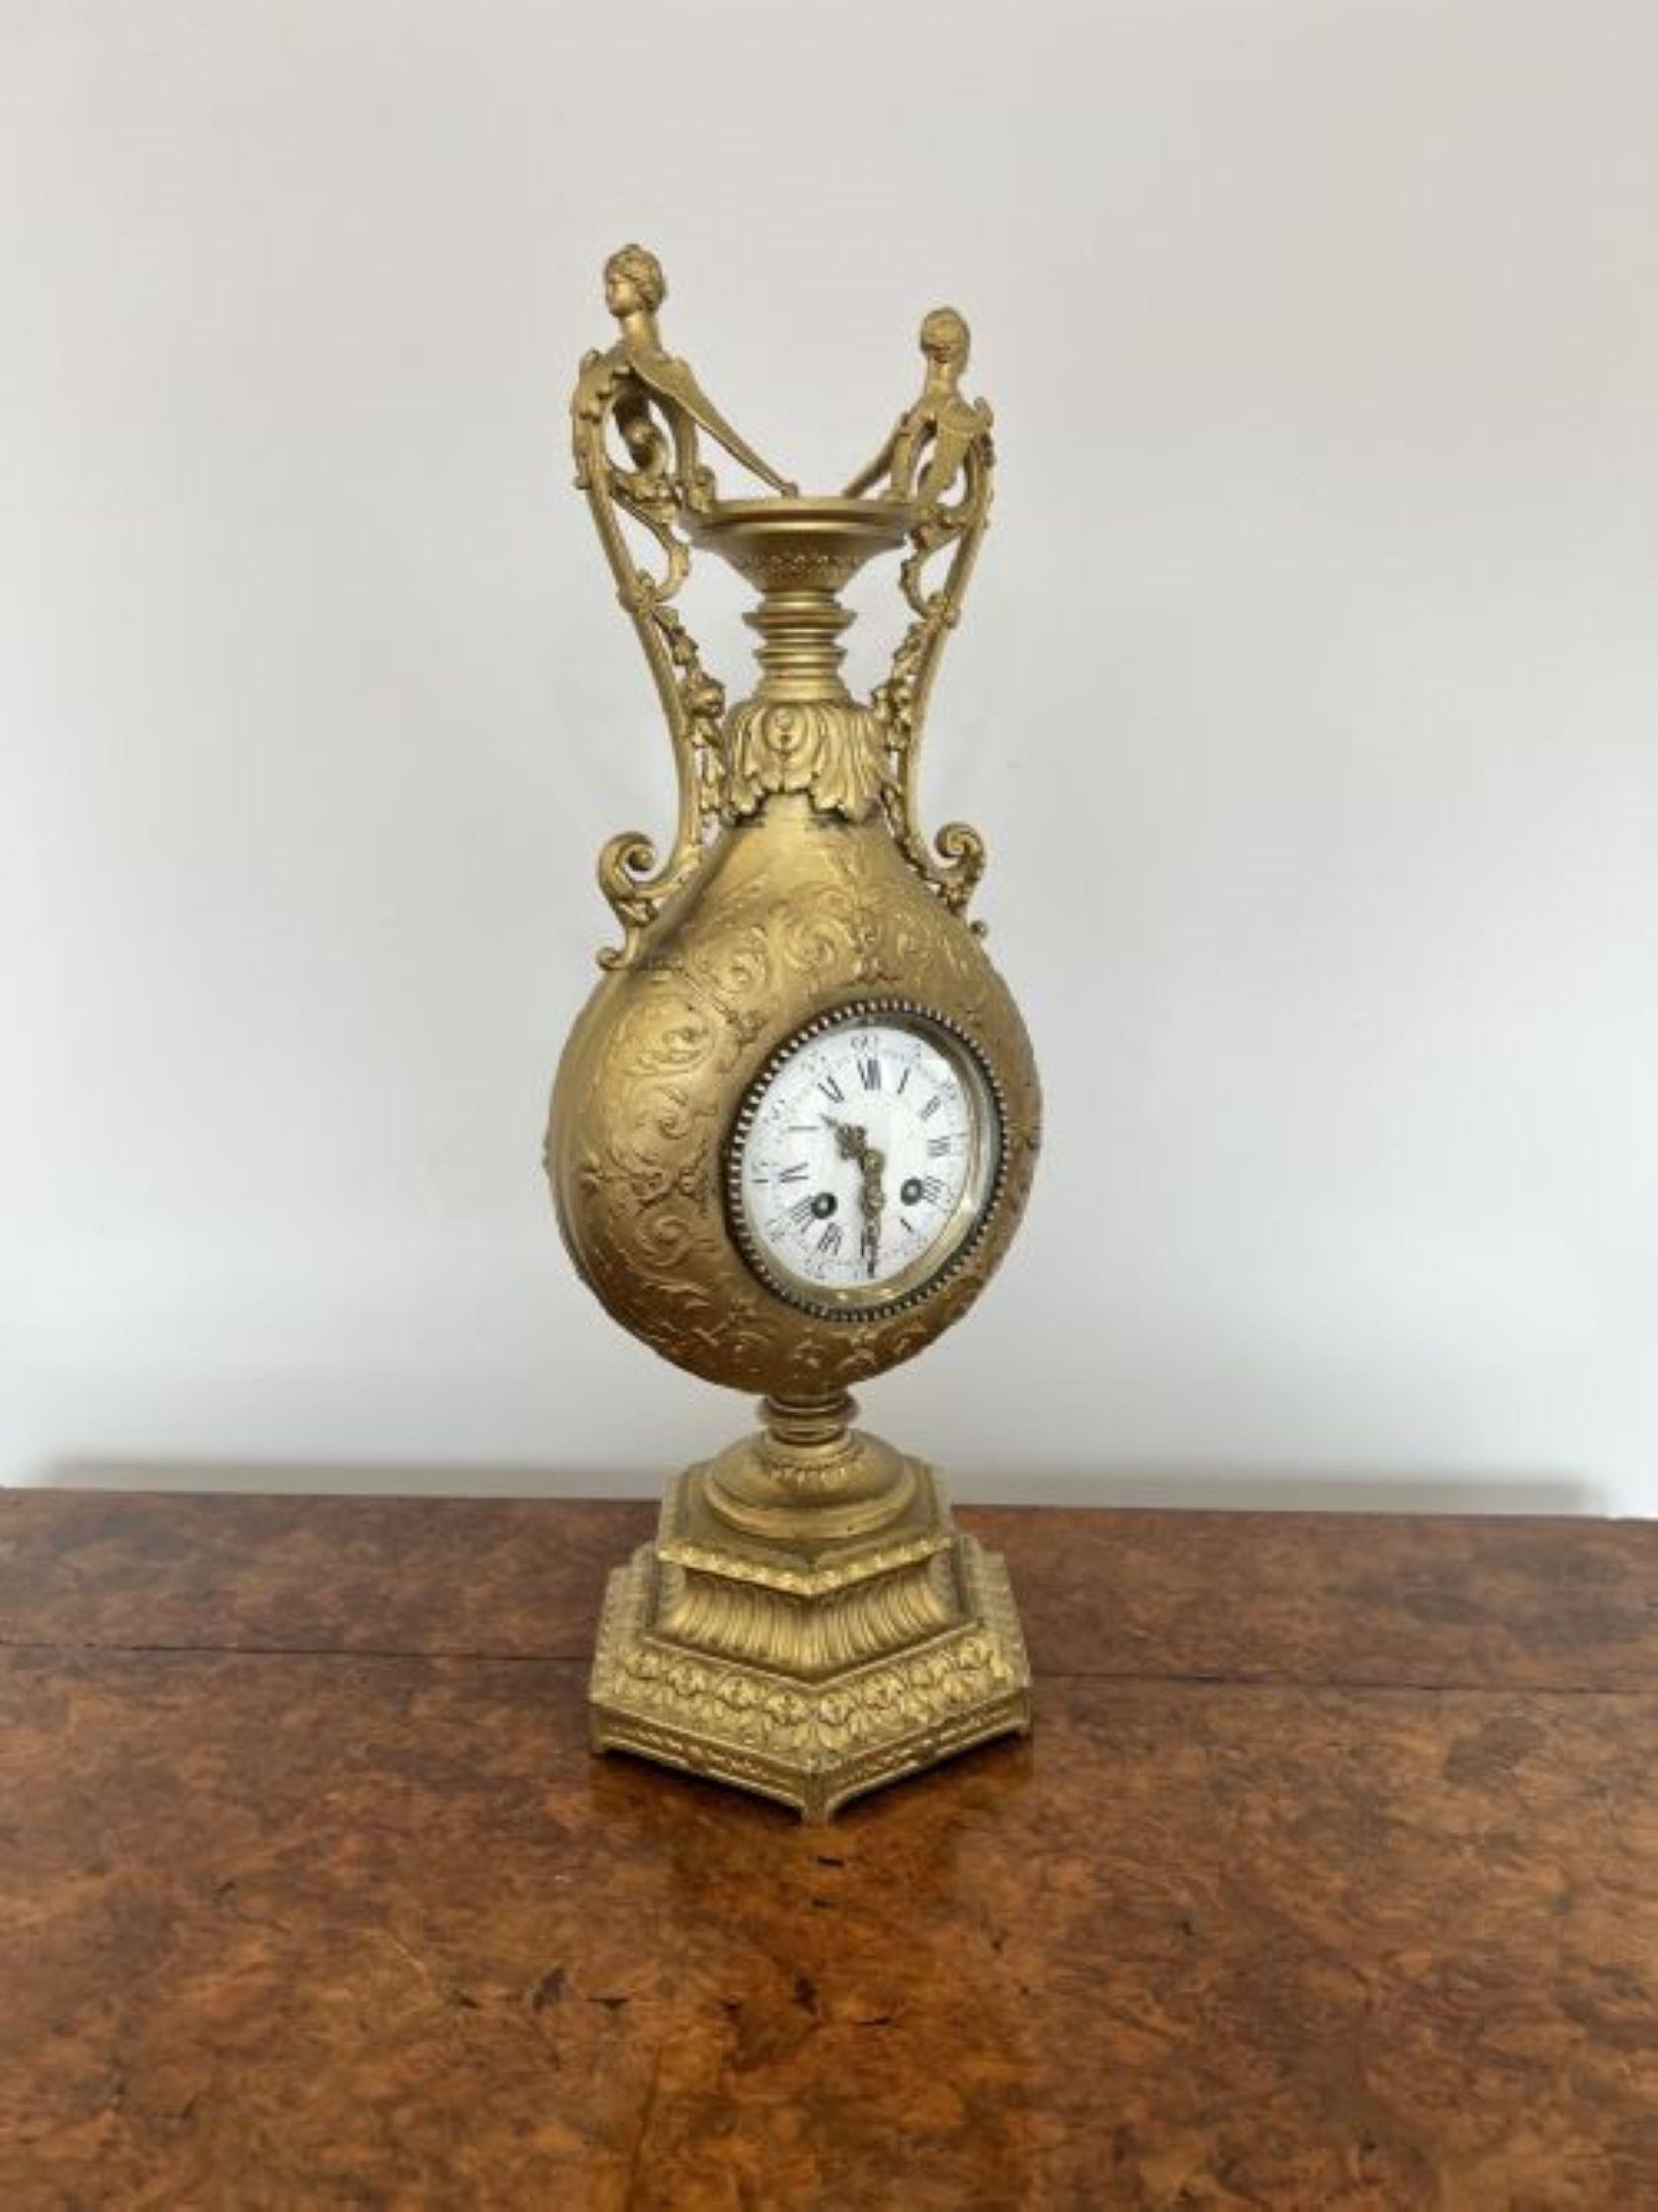 Fantastic quality antique Victorian French ornate eight day striking mantle clock, having a quality gilded ornate shape case, shaped handles with ornate figures to the top, standing on a hexagon shaped stepped base, circular enamel white dial to the